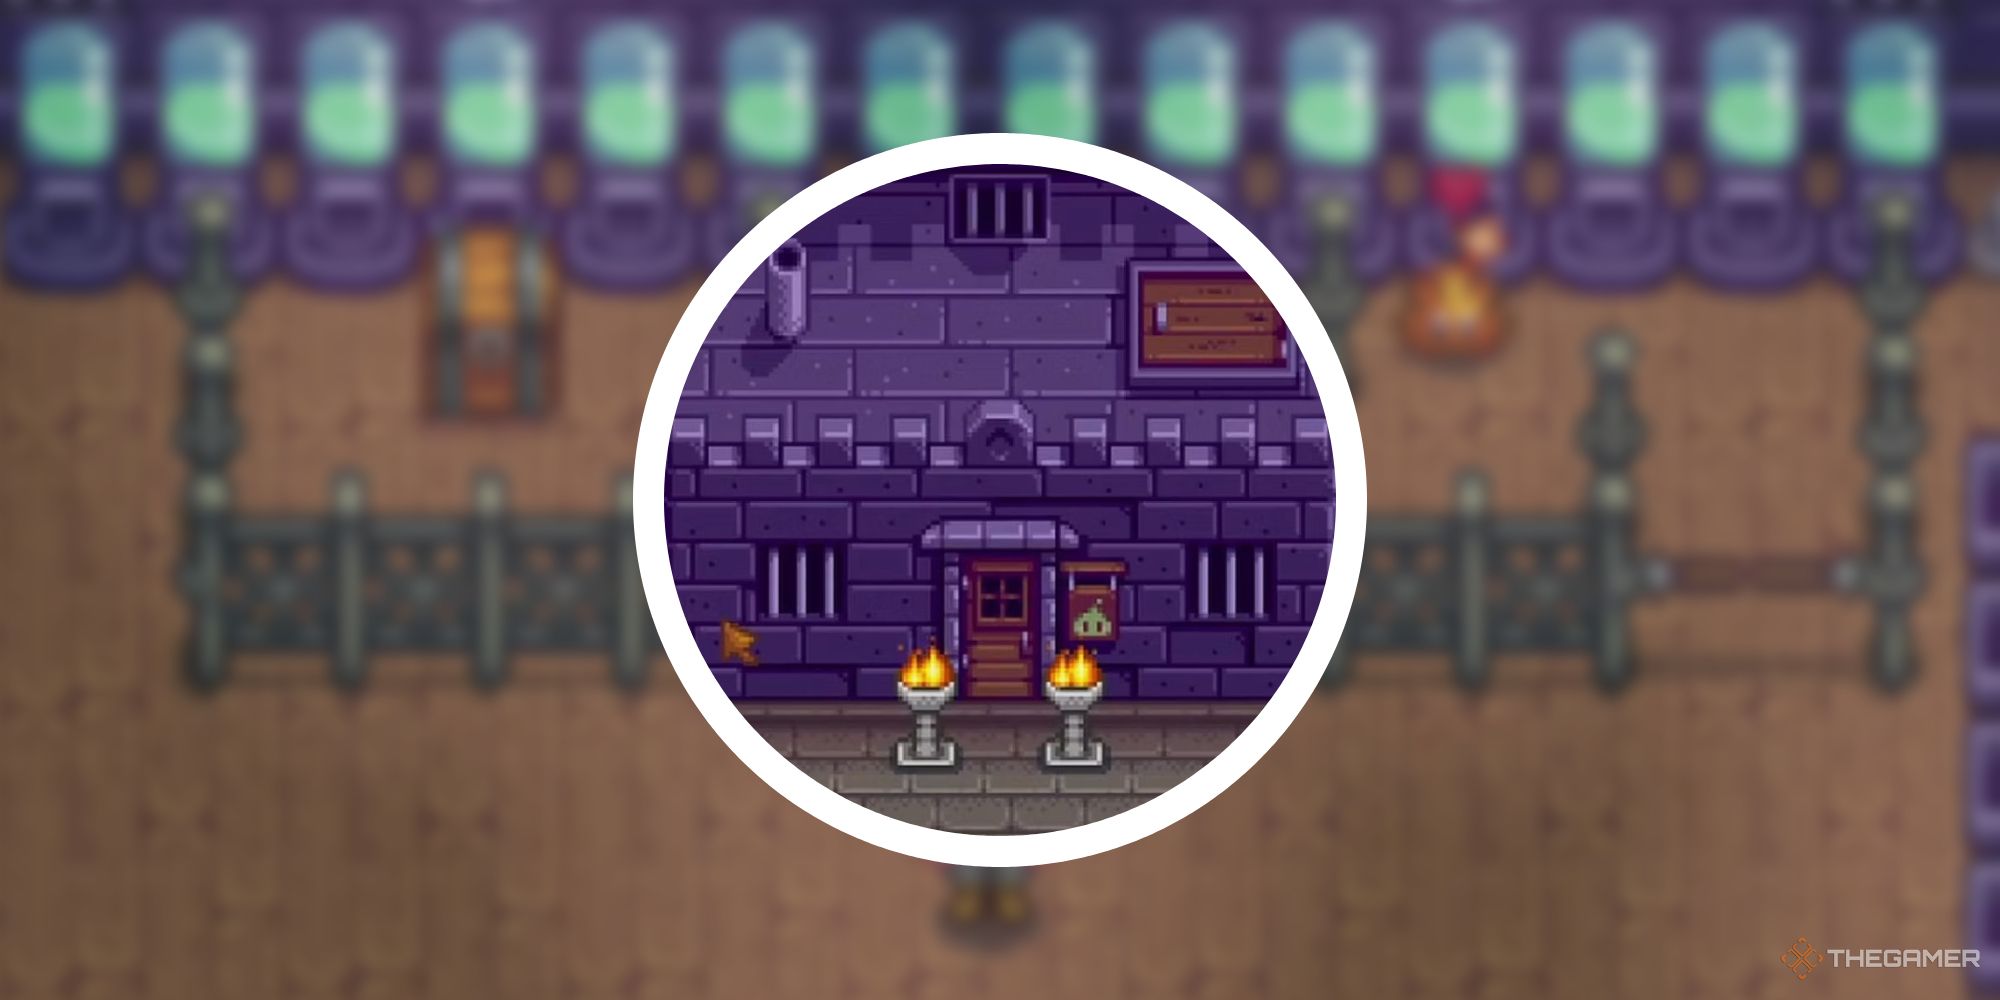 stardew valley slime hutch in circle png over image of blurry interior